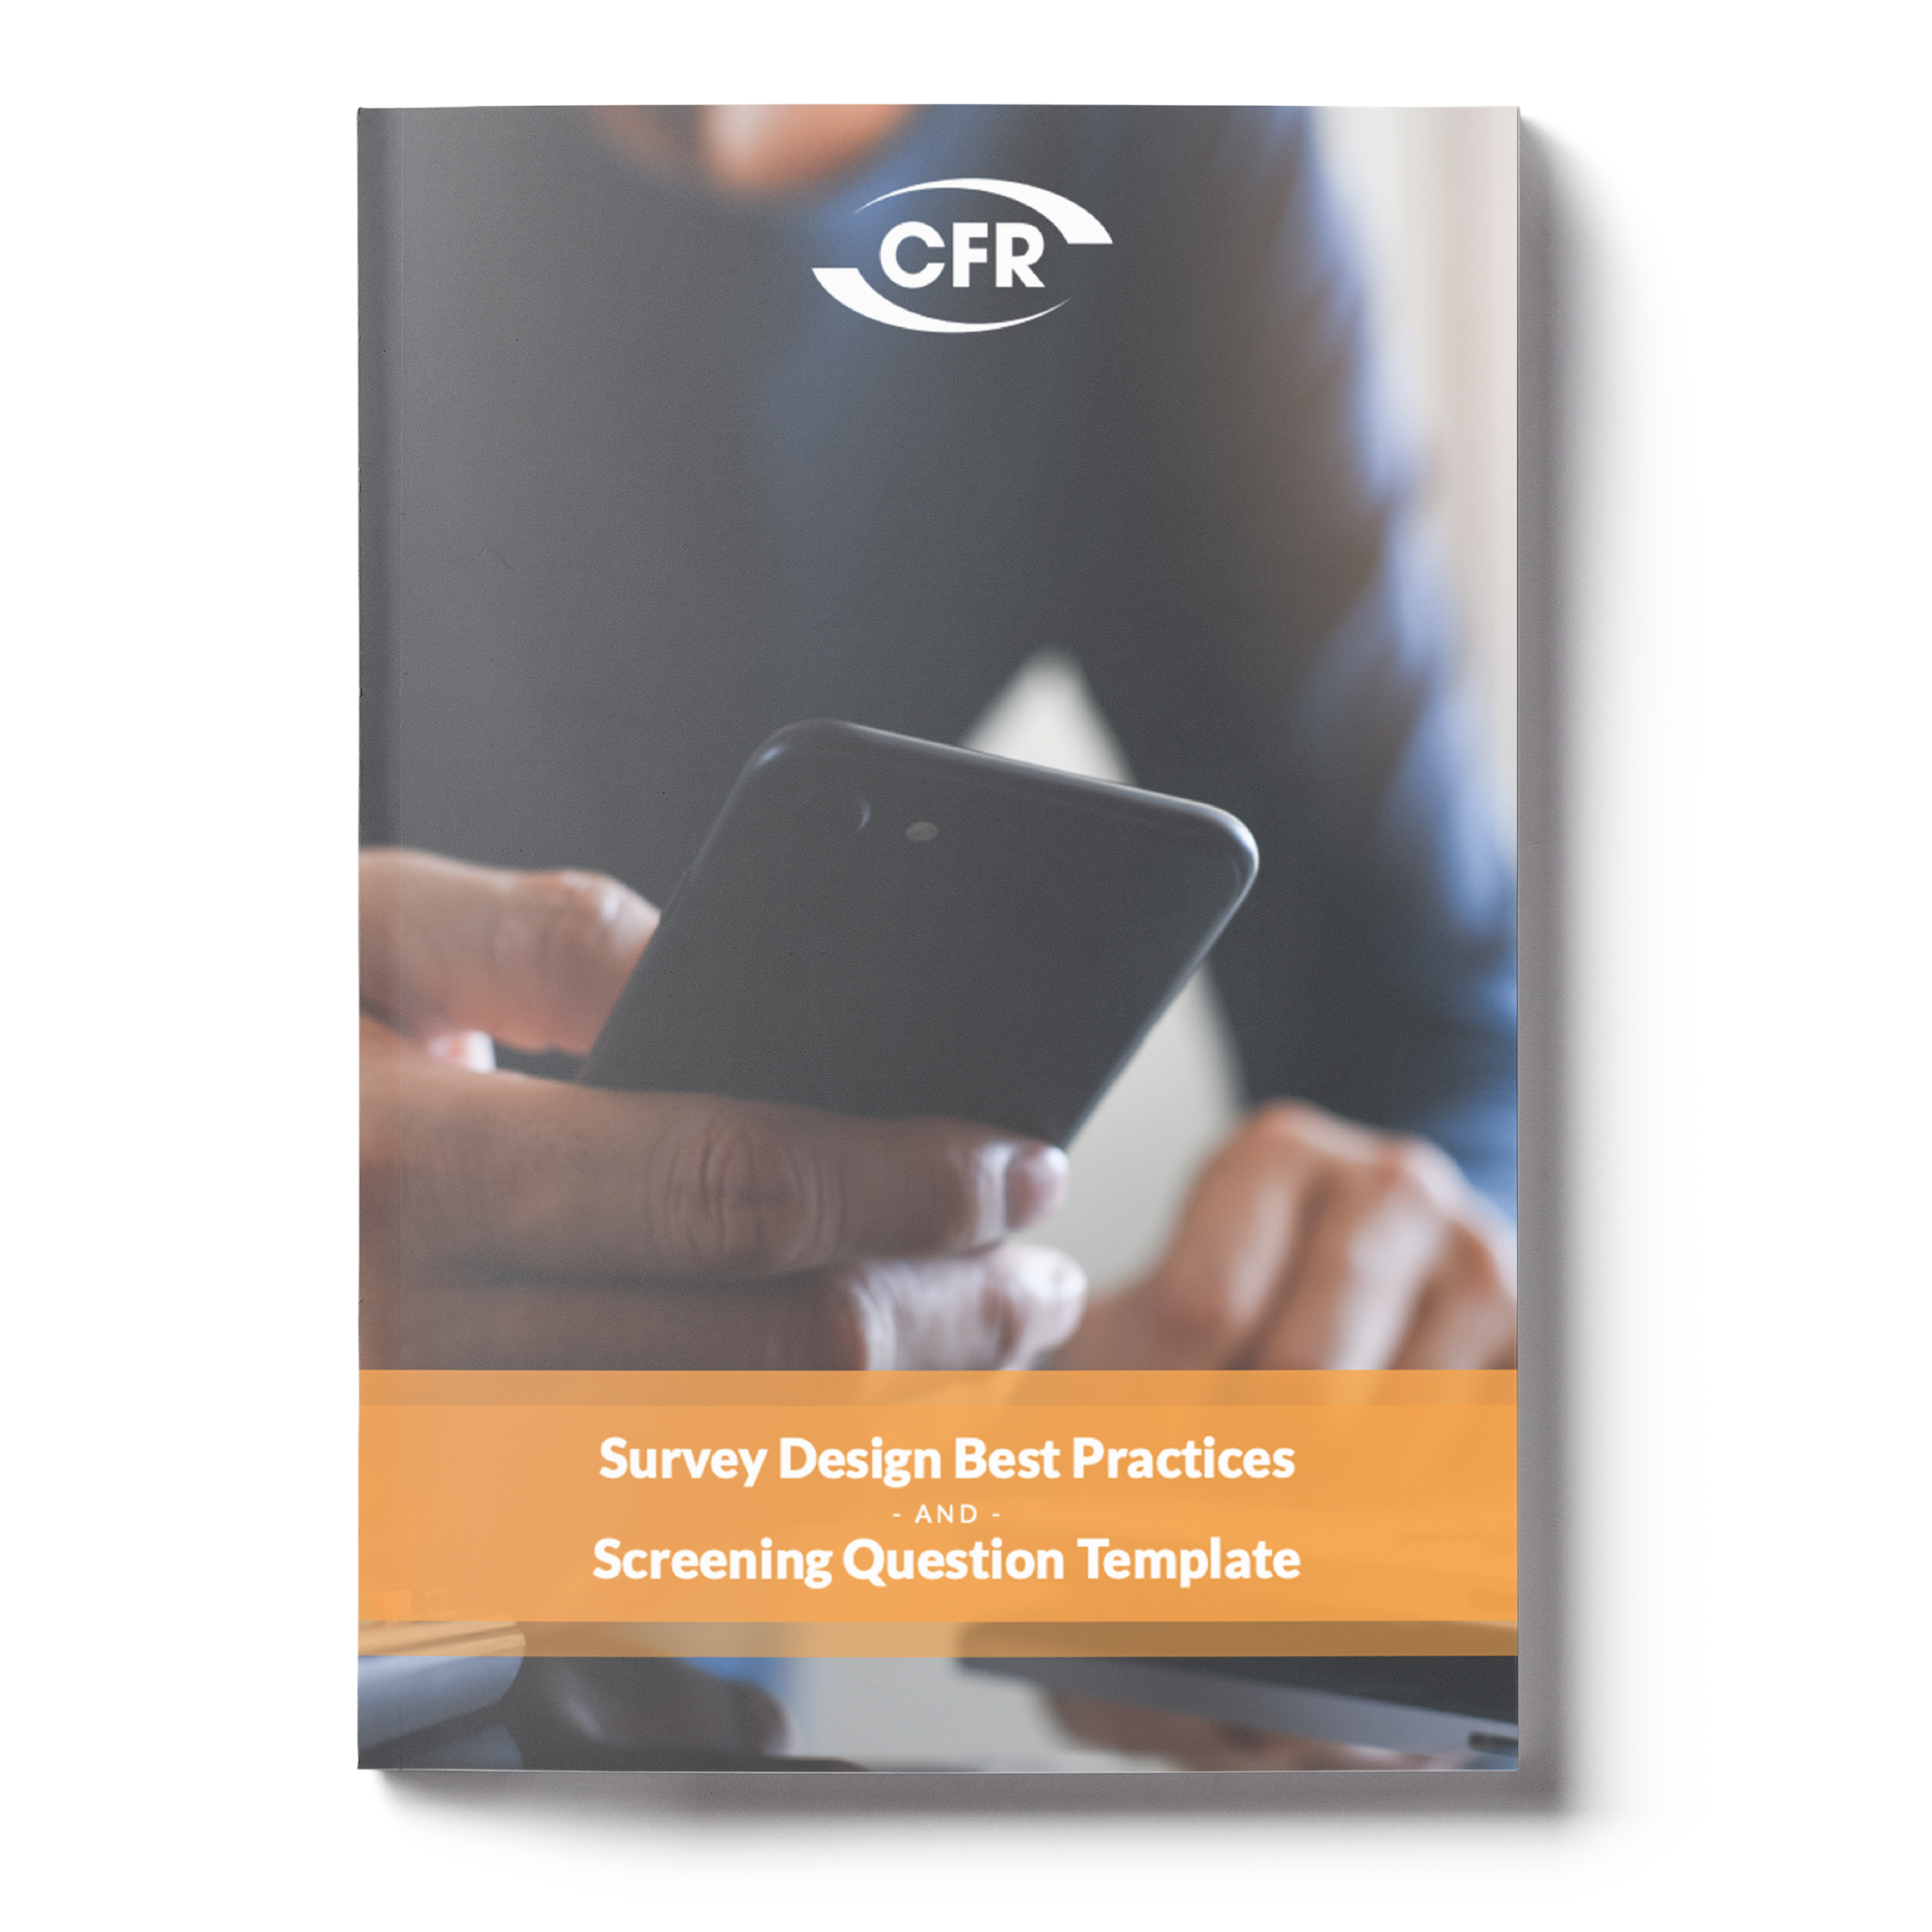 Survey Design Best Practices and Screening Question Template